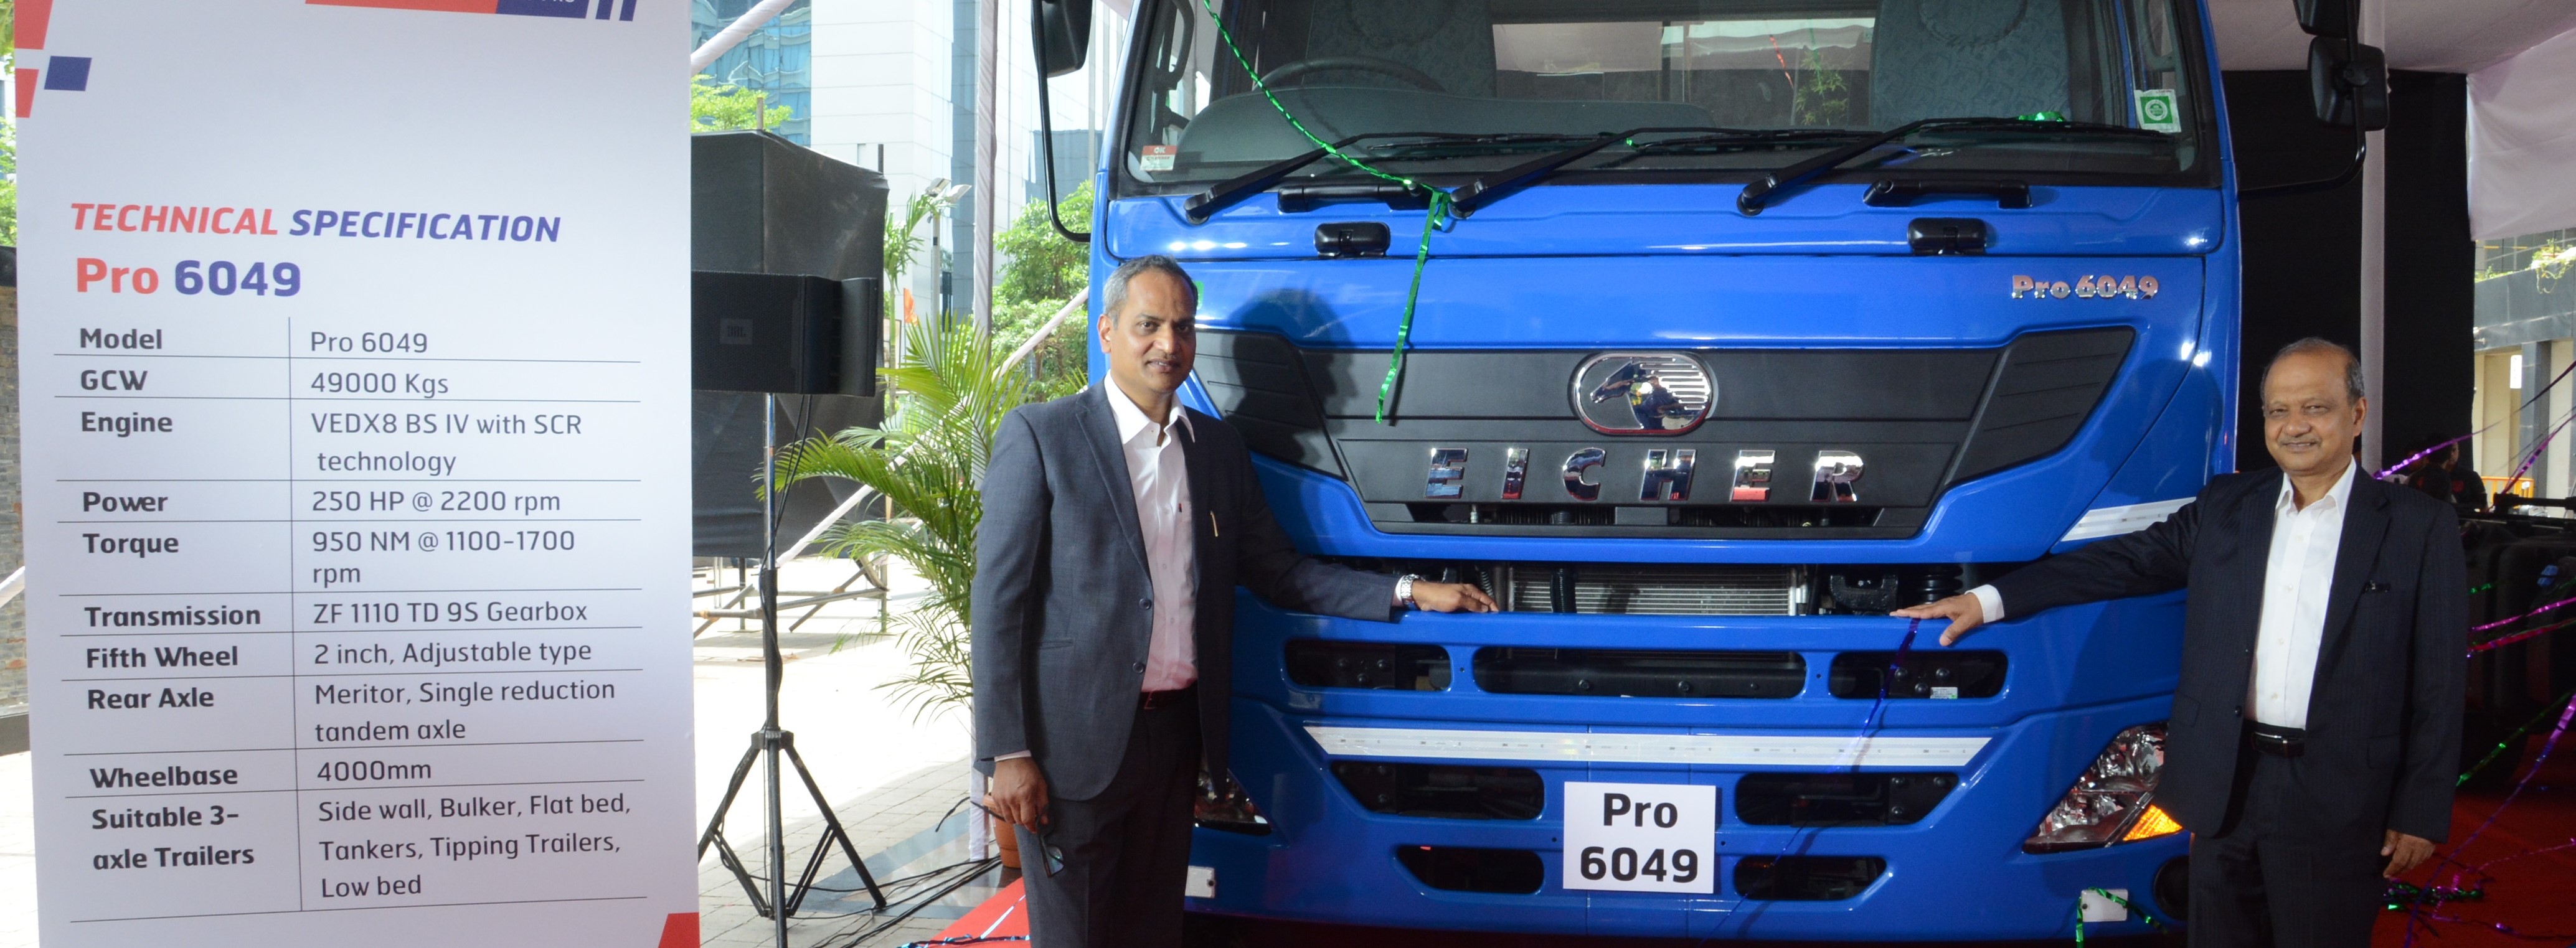 Introducing all new Eicher Pro 6049 with 250 HP set to modernise the tractor segment